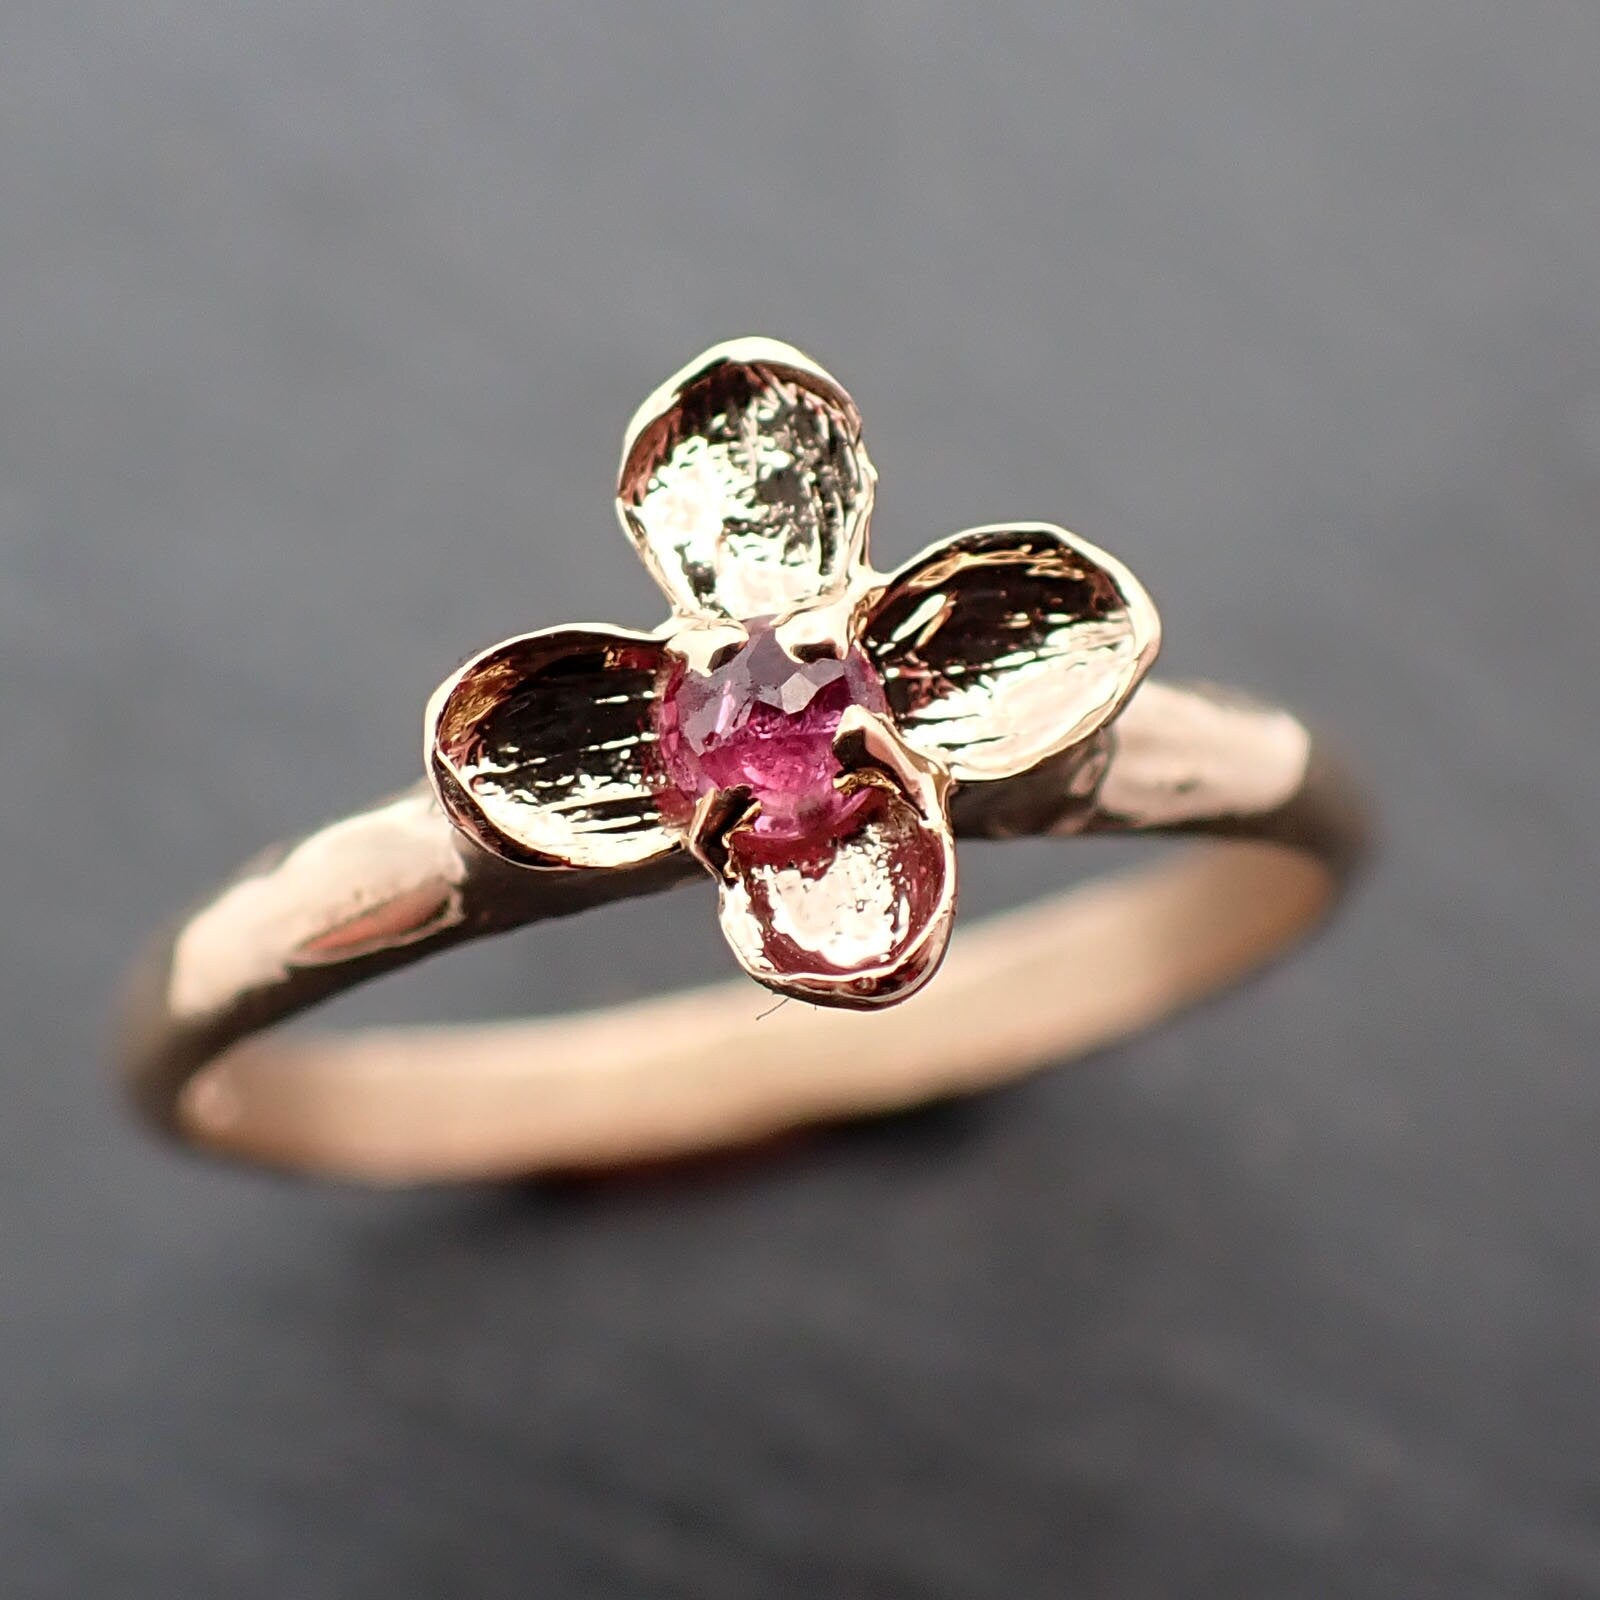 Real Lilac Flower casting with faceted Ruby 14k Yellow gold Solitaire Enchanted Garden Floral Ring byAngeline 3392